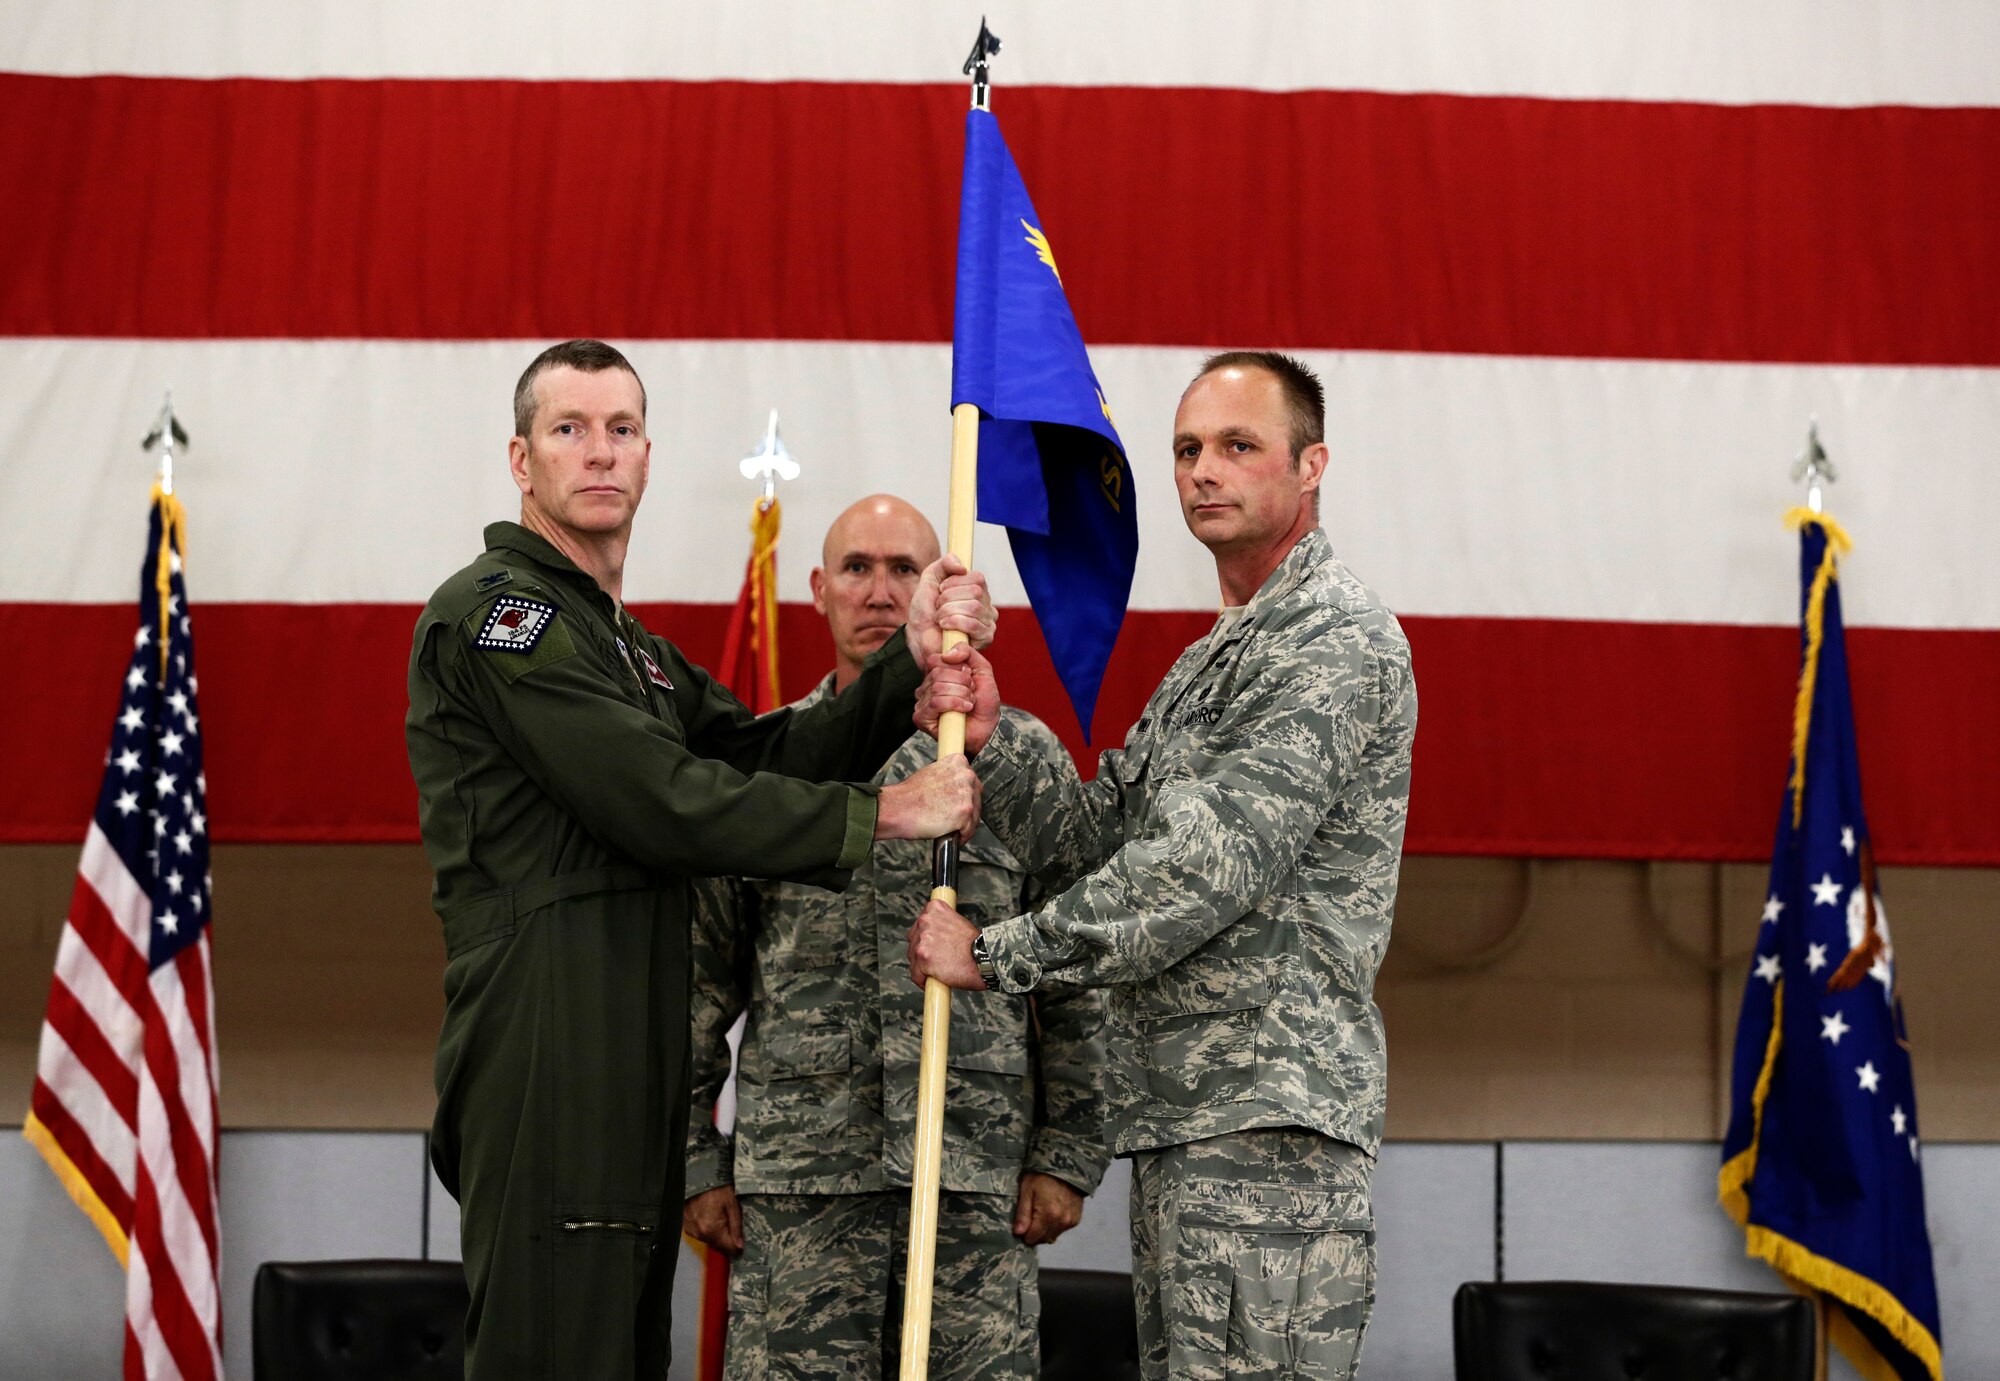 Lt. Col. Robert Kinney assumed command of the 188th Intelligence, Surveillance and Reconnaissance Group during a Conversion Day ceremony held at Ebbing Air National Guard Base, Fort Smith, Arkansas, June 7, 2014.  The ceremony also recognized the many changes occurring at the wing as a result of its conversion to a remotely piloted aircraft (MQ-9 Reapers) and ISR mission. The 188th Fighter Wing was redesignated as the 188th Wing during the event as well. (U.S. Air National Guard photo by Master Sgt. Mark Moore)